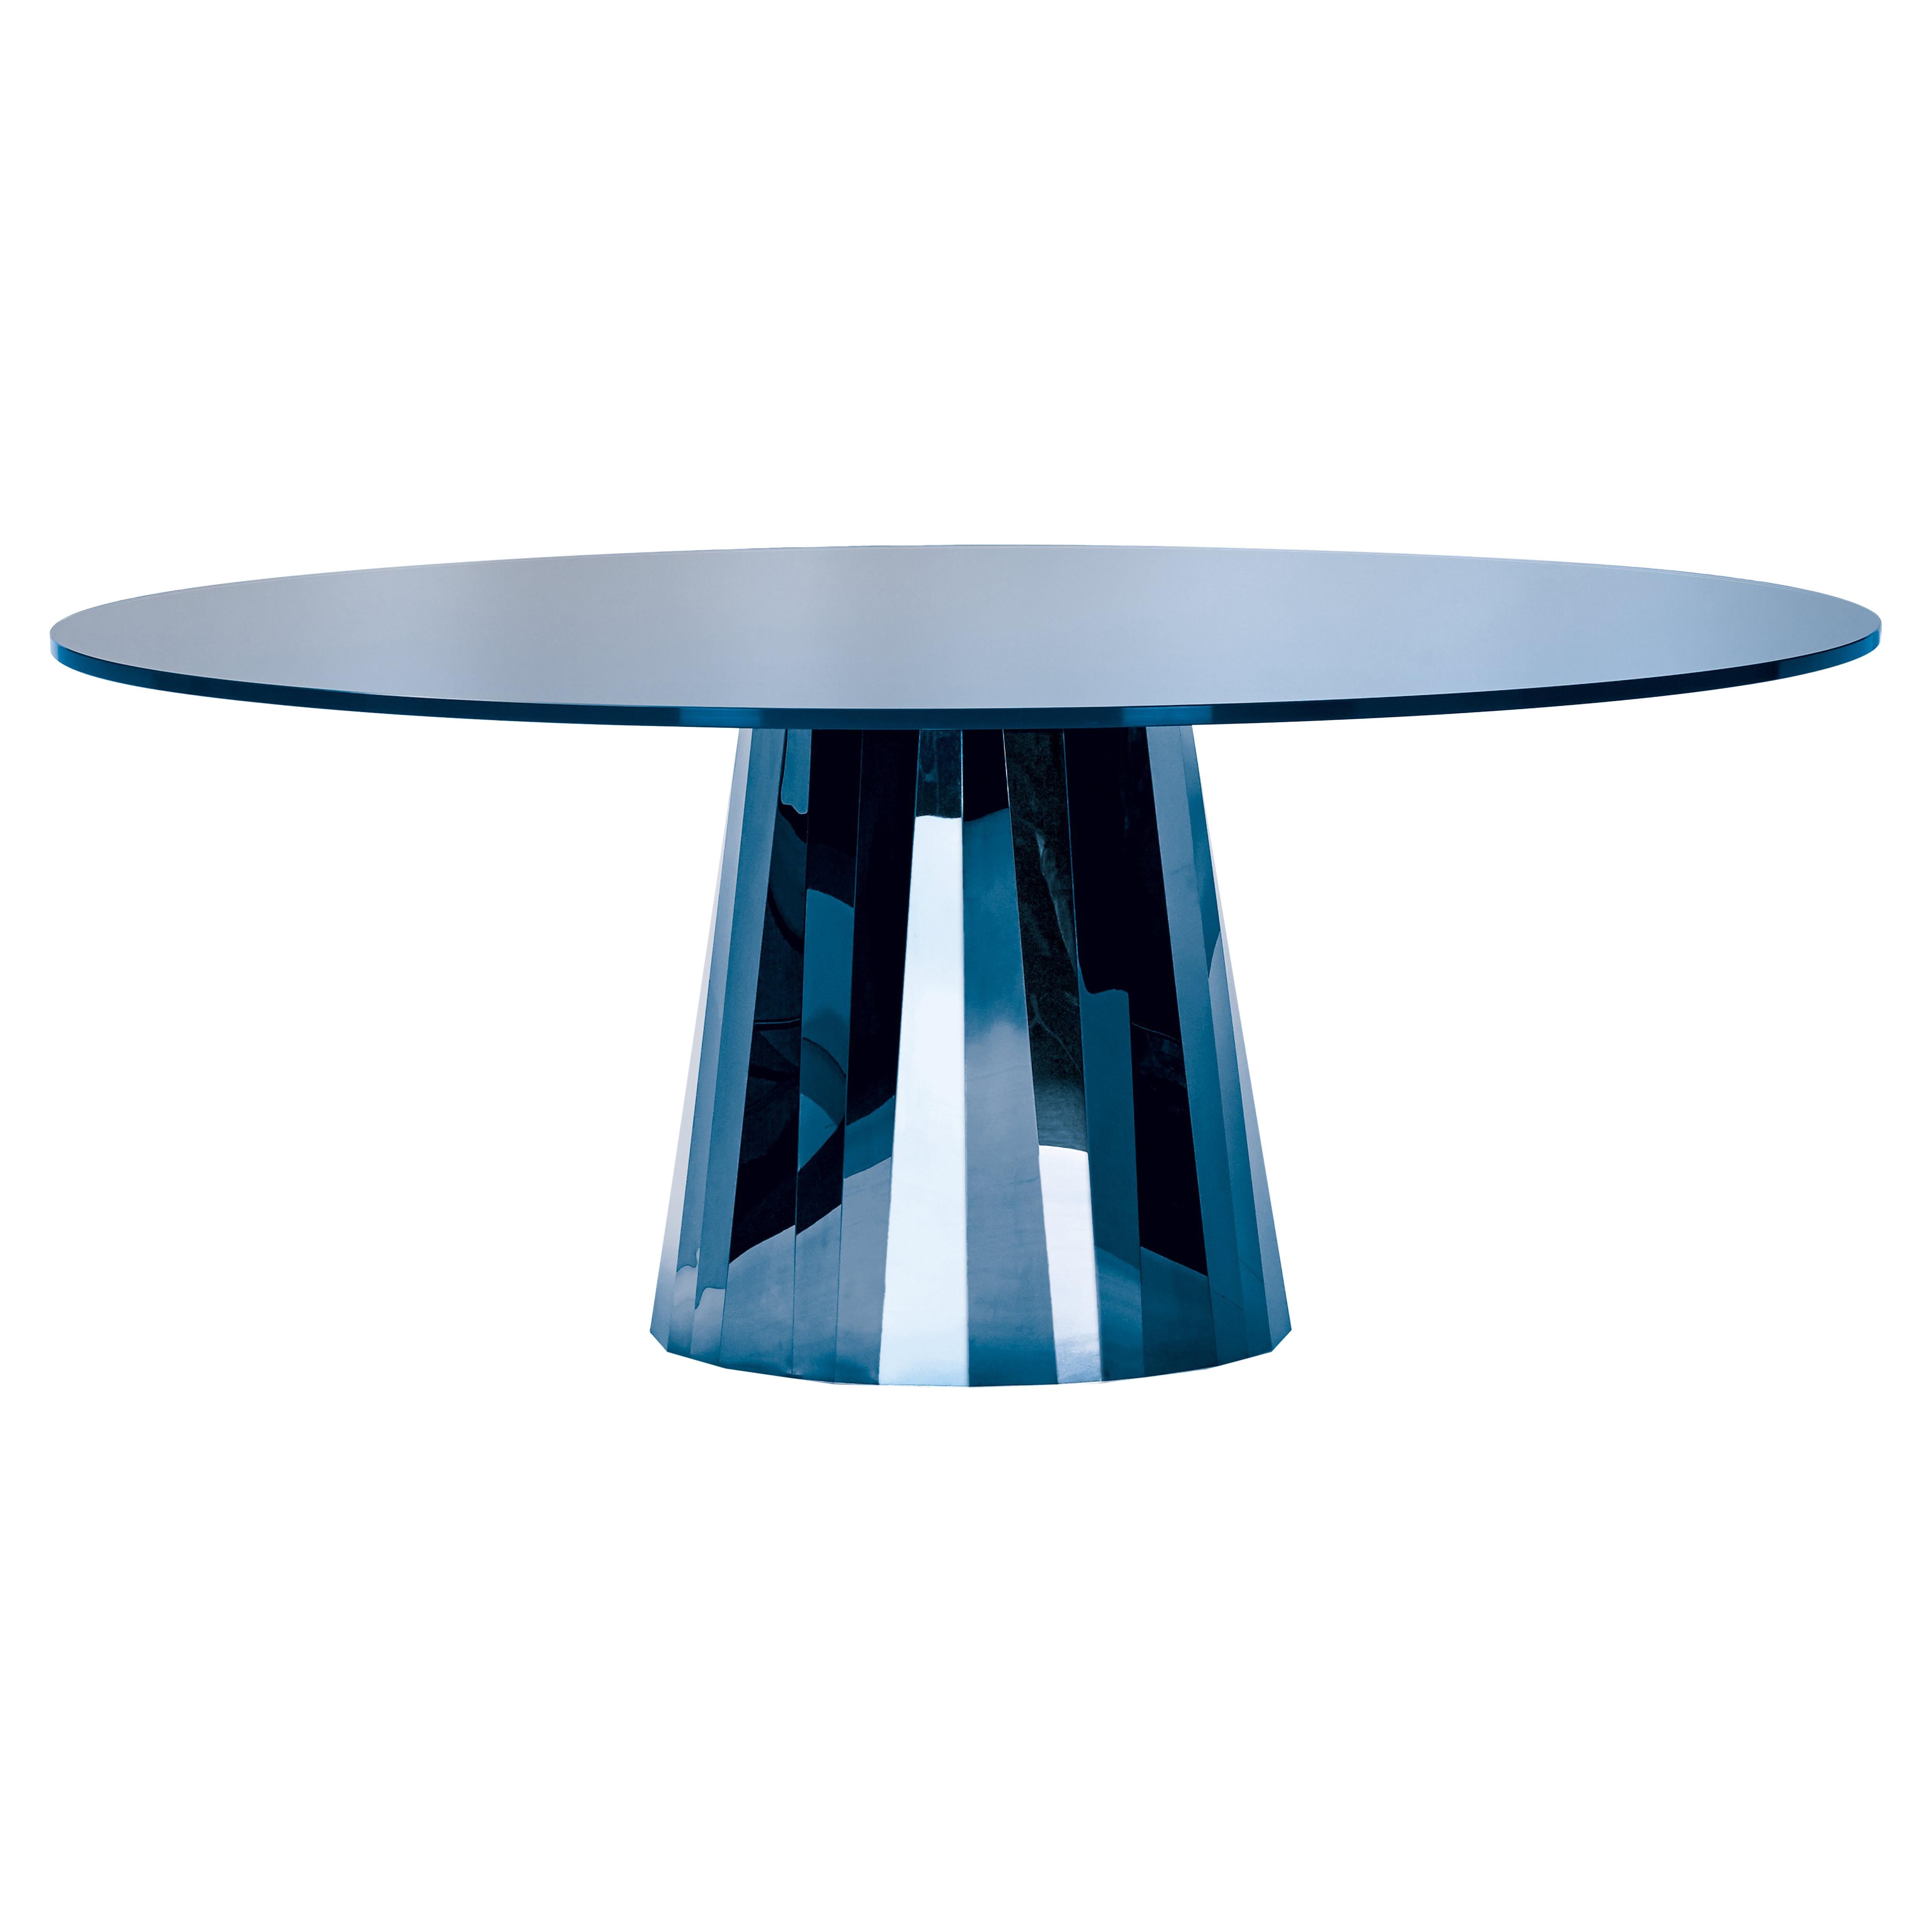 ClassiCon Pli Table in Blue with Lacquer Top by Victoria Wilmotte